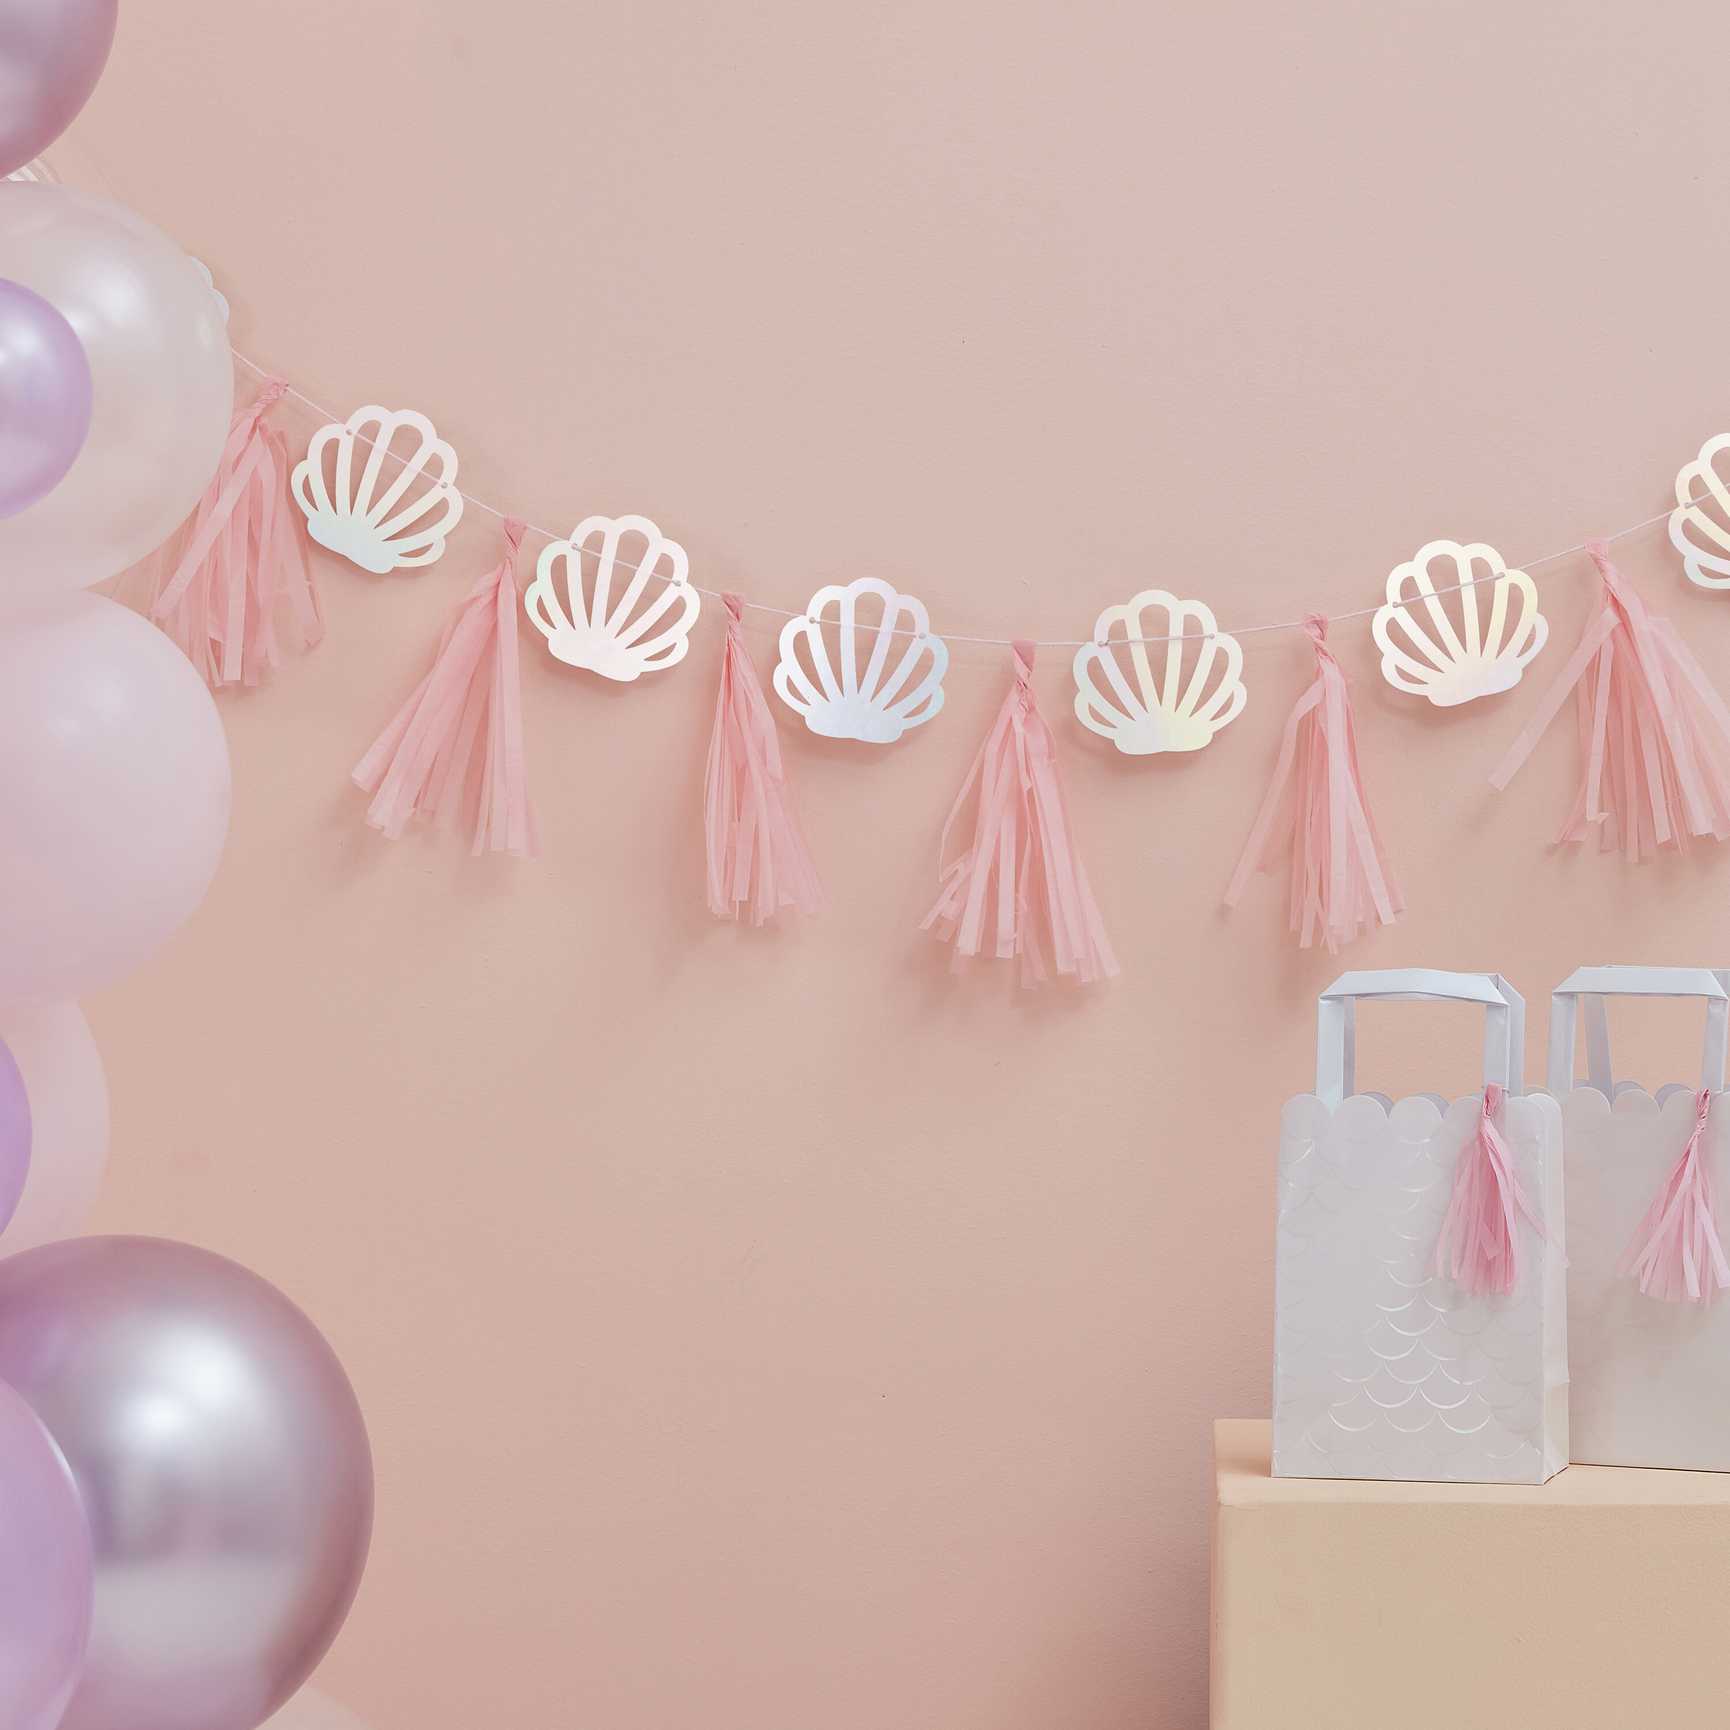 Mermaid Party Decorations – Little Big Party Co.